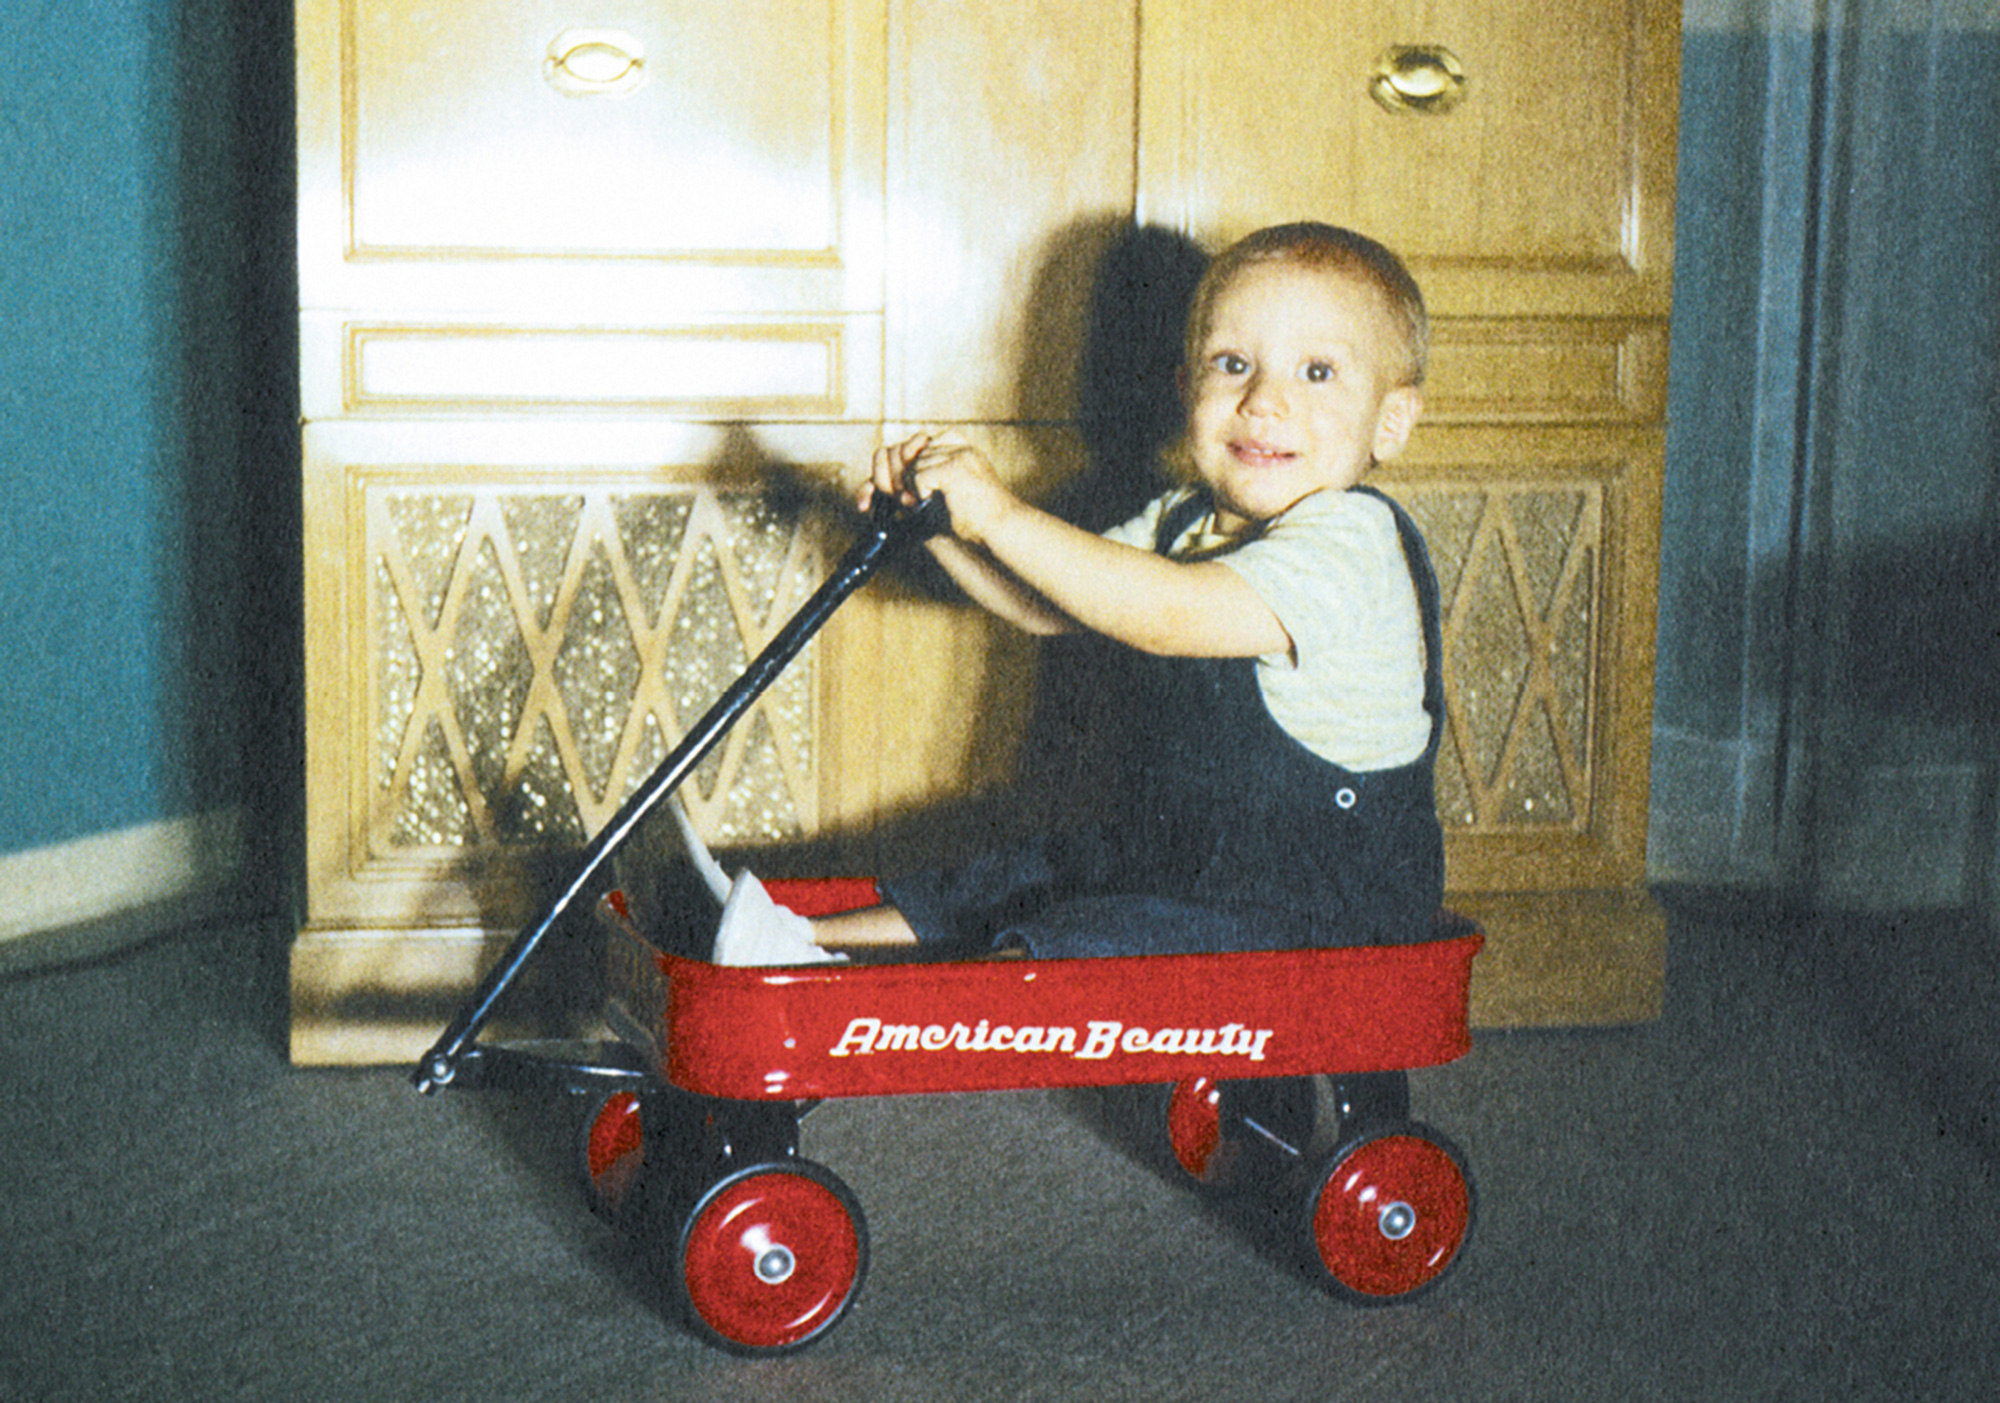 A photograph of a baby riding in a red toy wagon.